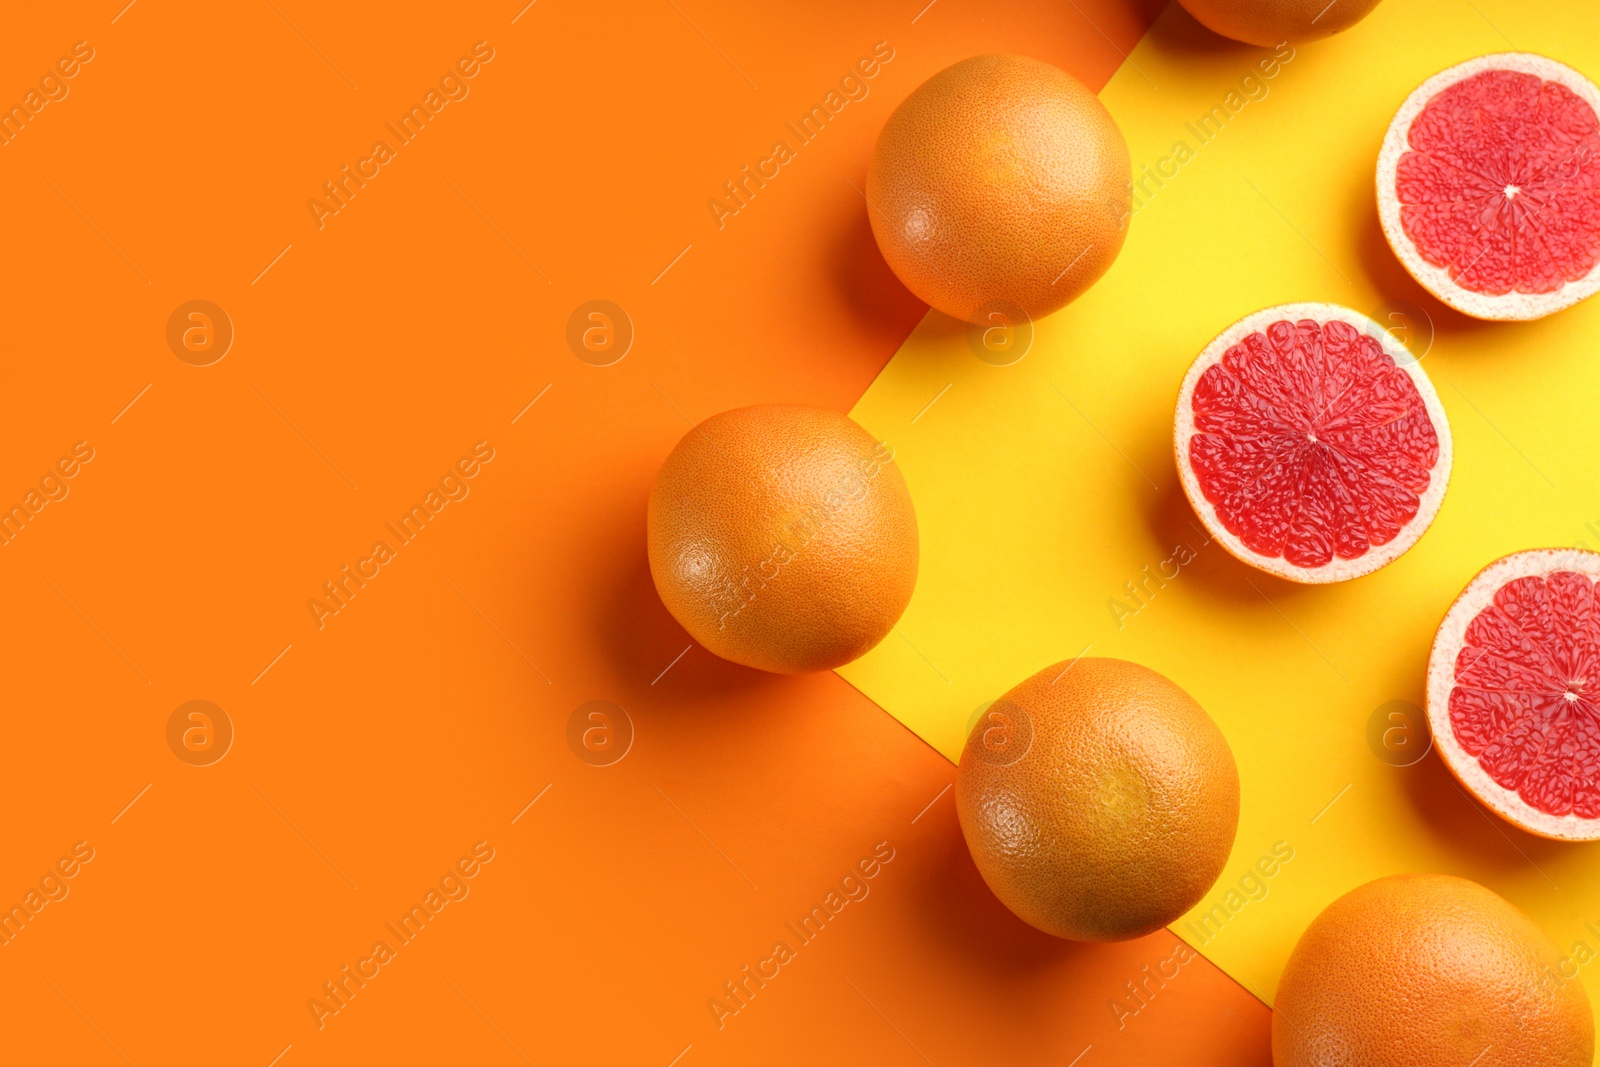 Photo of Cut and whole ripe grapefruits on color background, flat lay